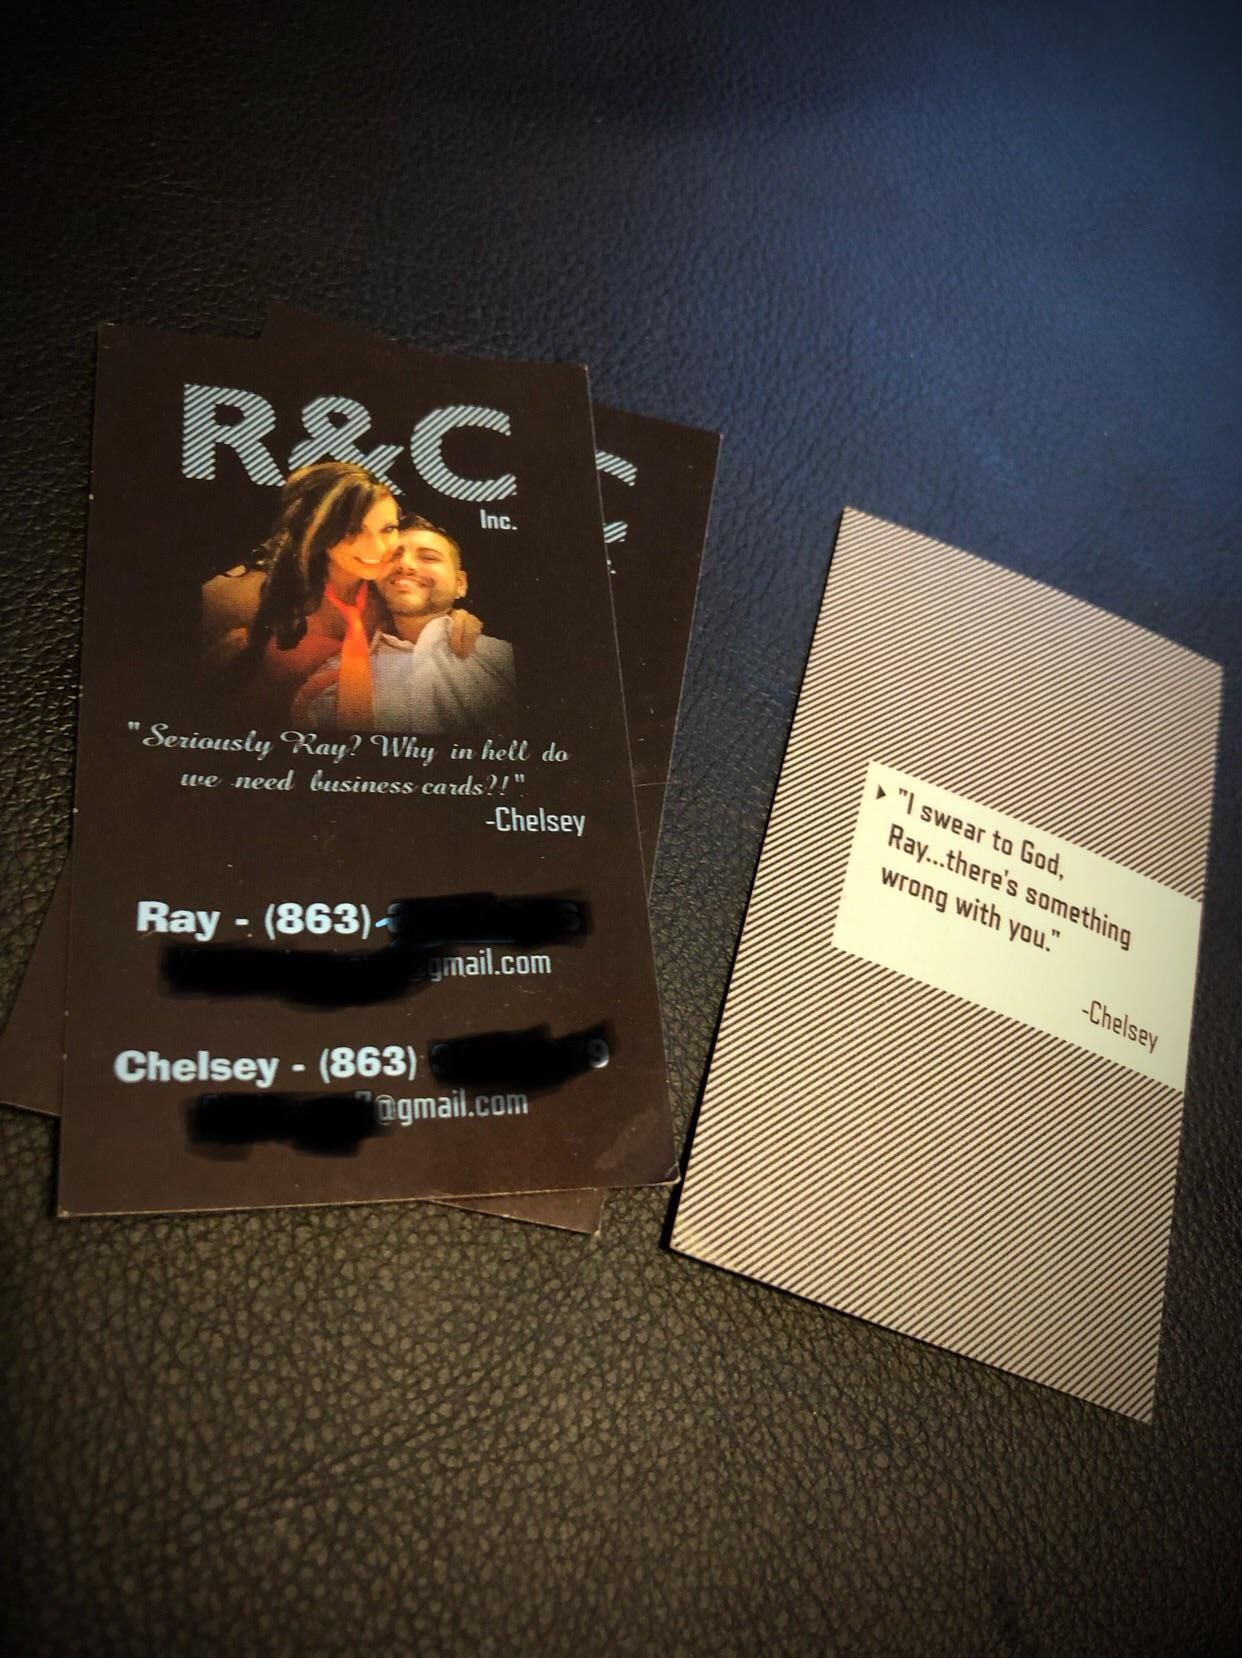 I had a promo code for 250 free business cards, so I made cards for my wife and I